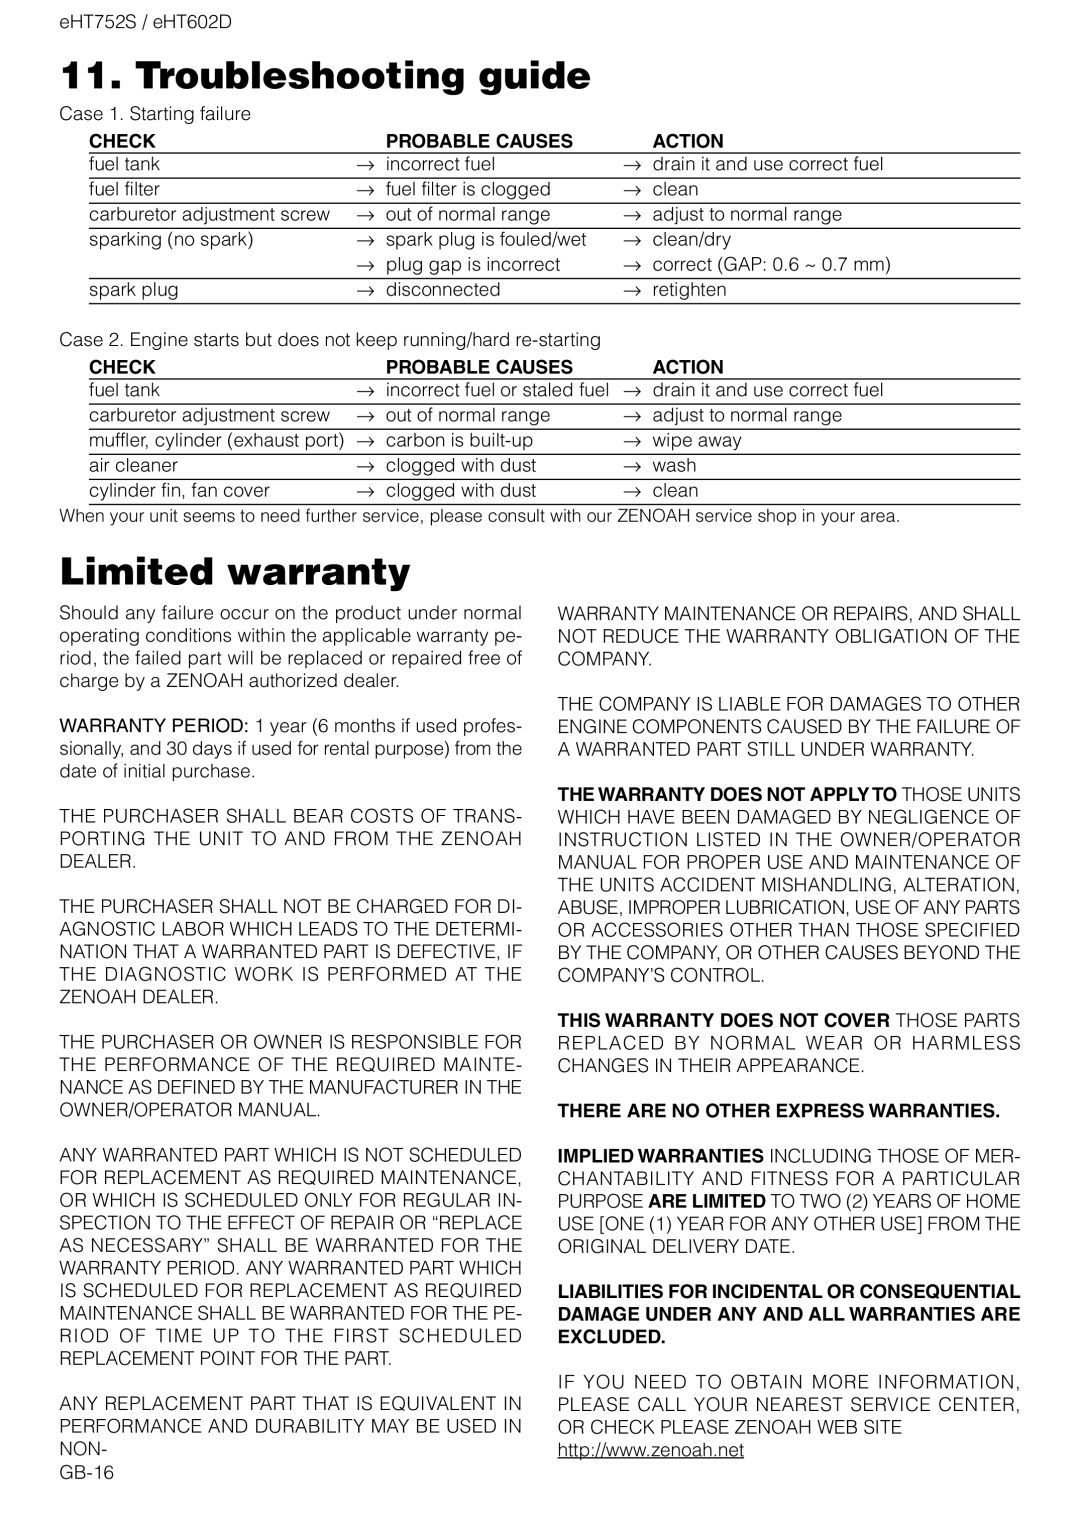 Zenoah EHT602D, EHT752S owner manual Troubleshooting guide, Limited warranty, Check, Probable Causes, Action 